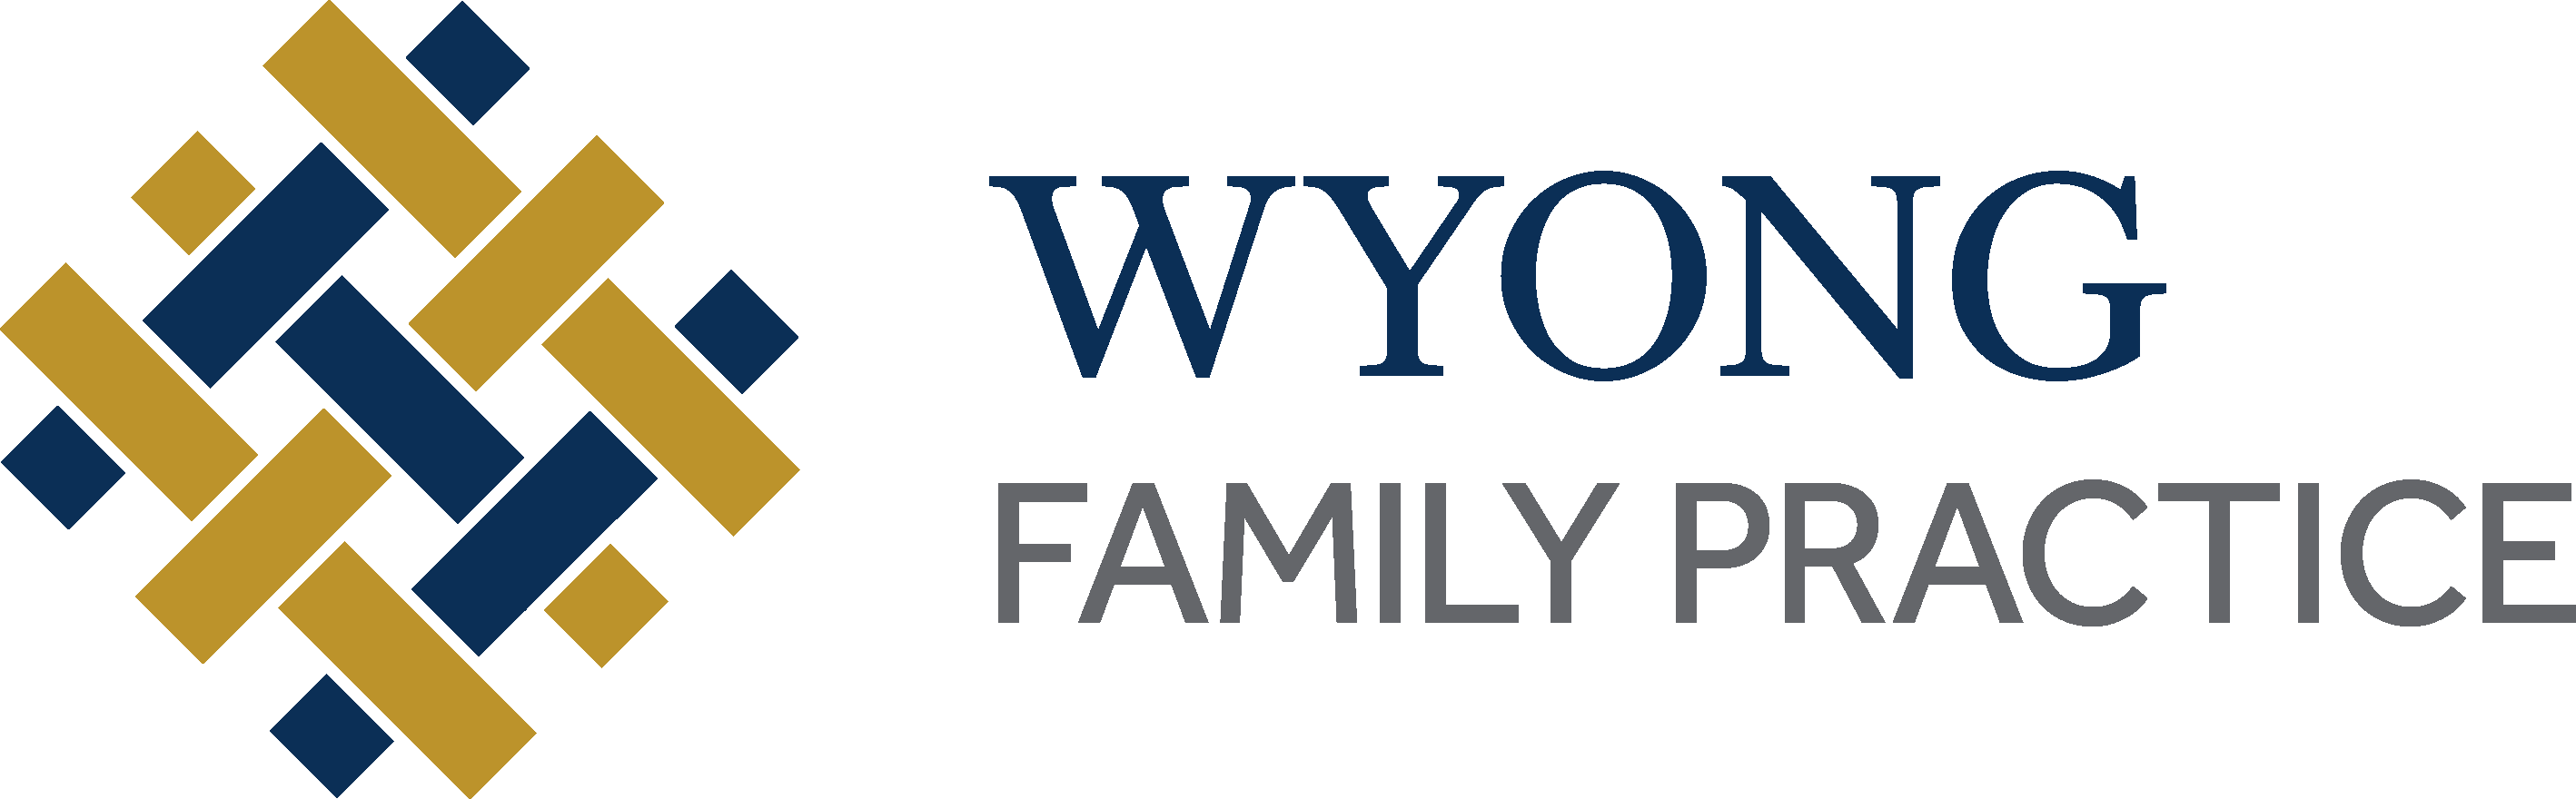 Wyong Family Practice